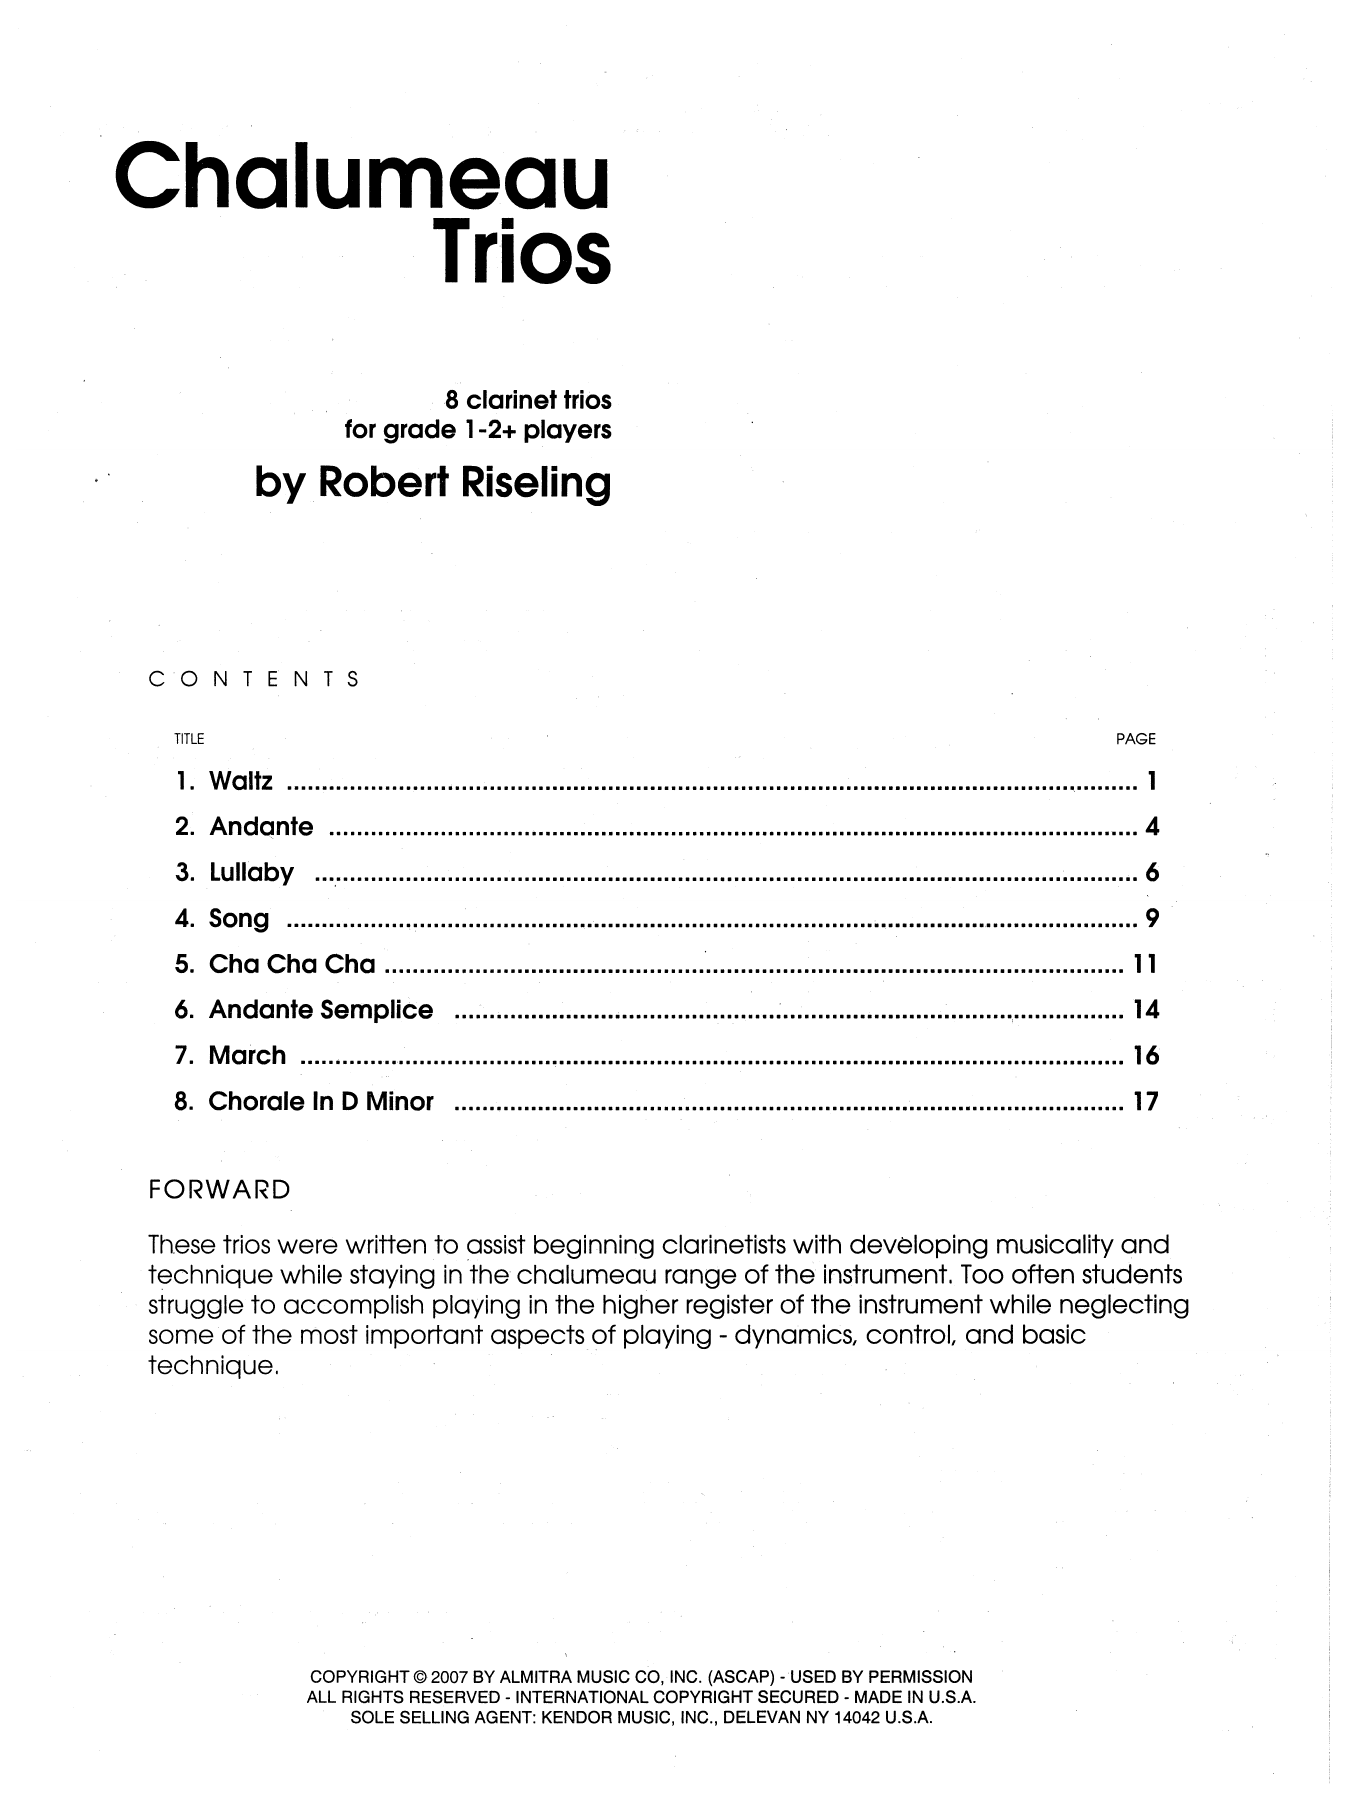 Riseling Chalumeau Trios - Full Score sheet music notes and chords. Download Printable PDF.